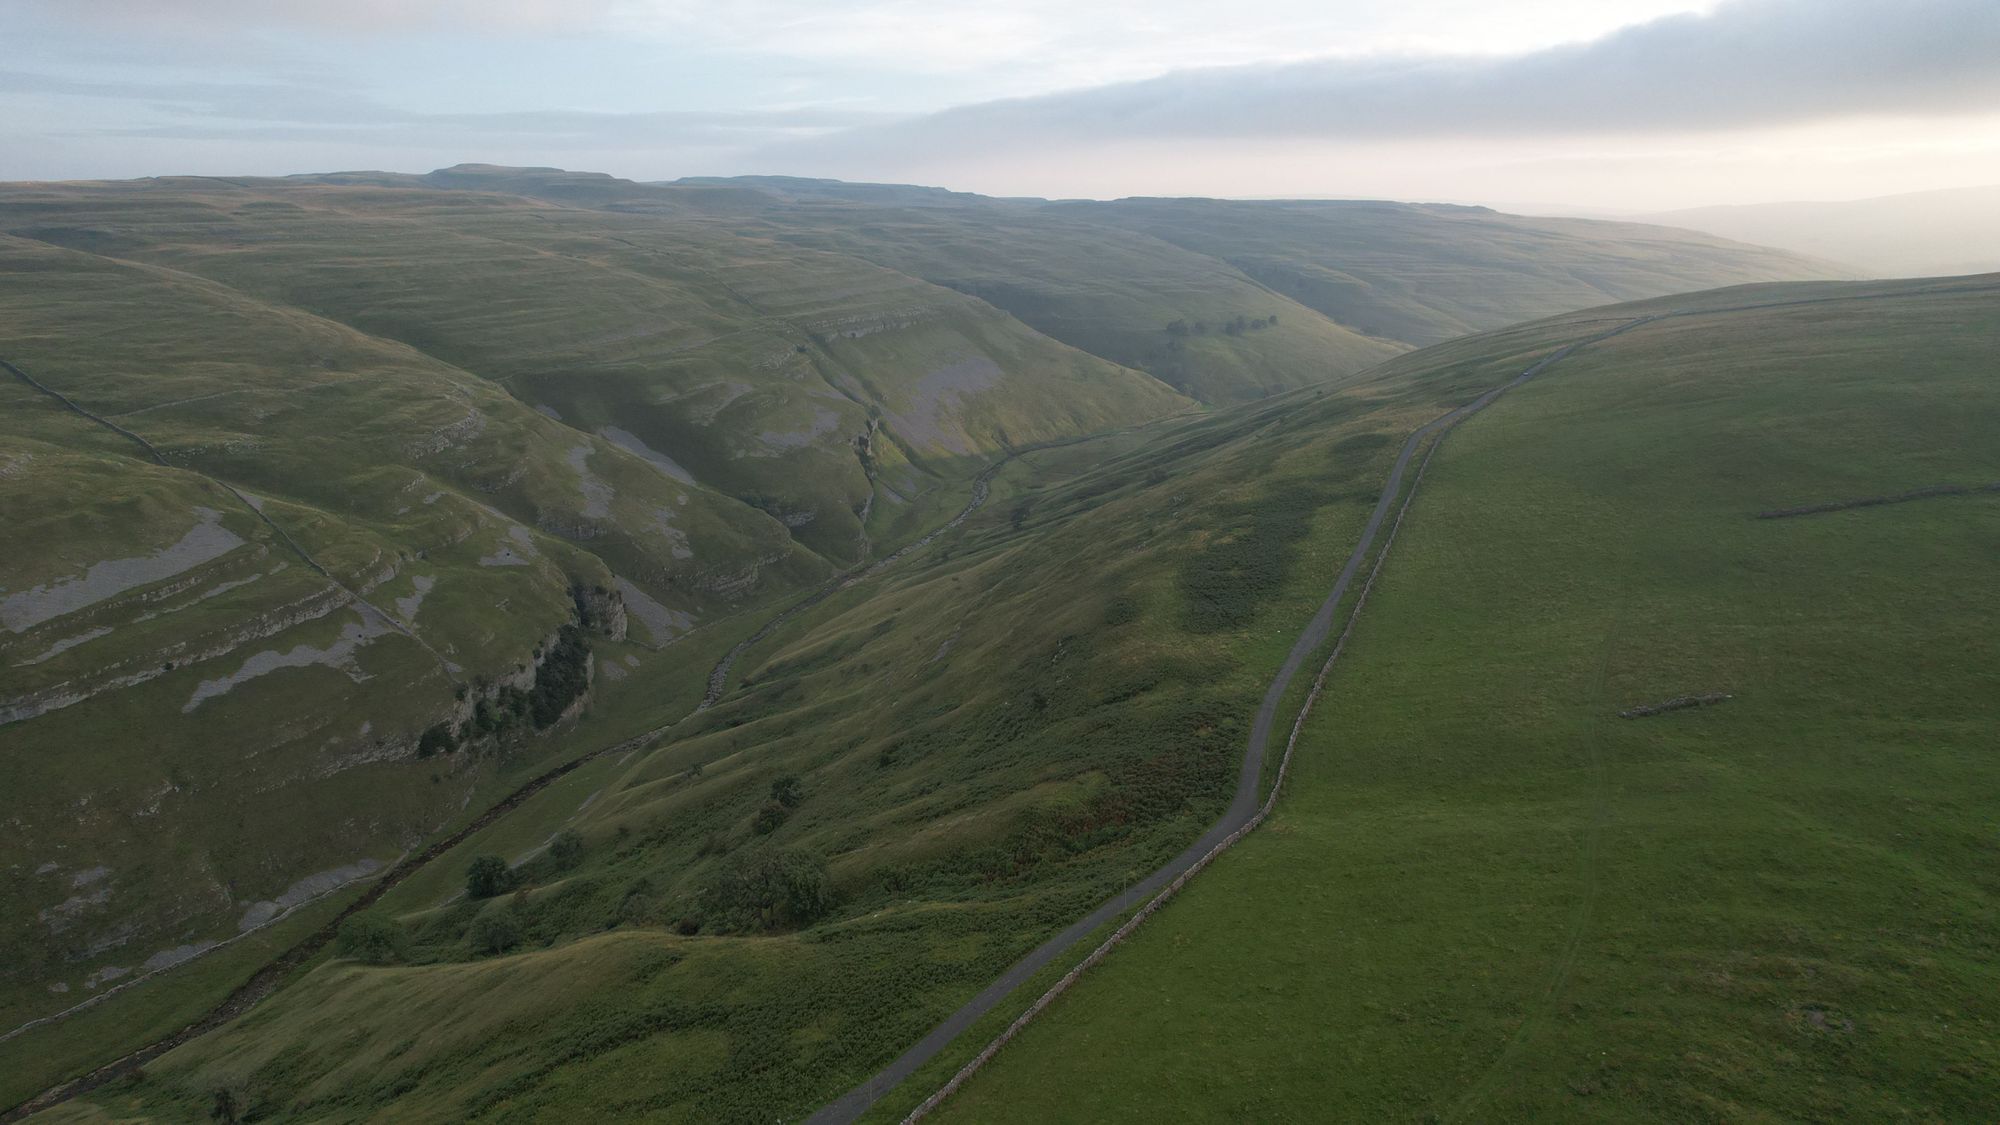 The remarkable views of Upper Coquetdale, on the Scottish Border. Photo: Markus Stitz